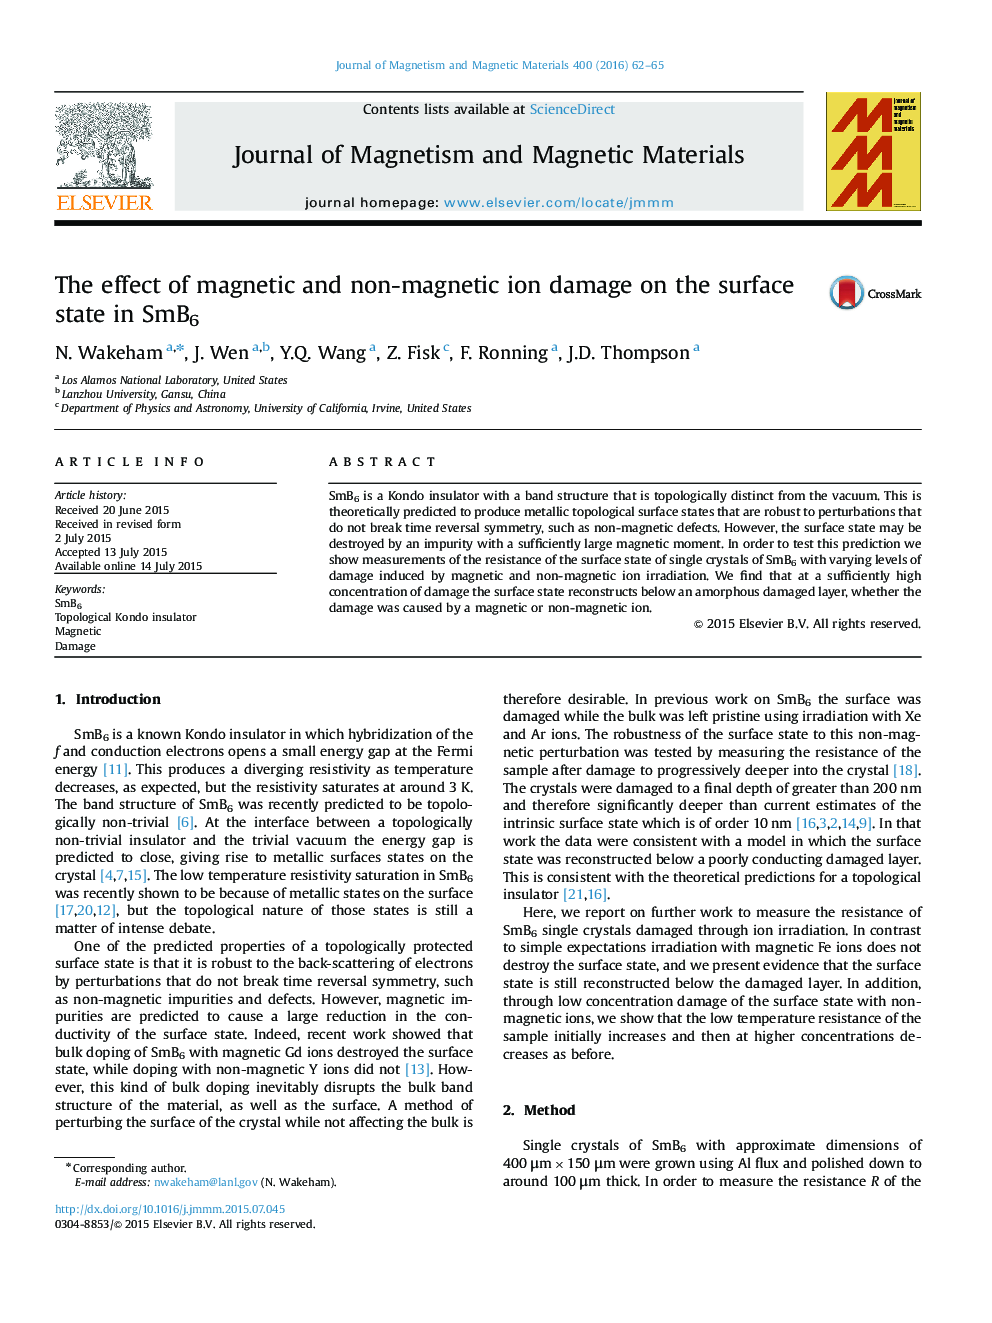 The effect of magnetic and non-magnetic ion damage on the surface state in SmB6